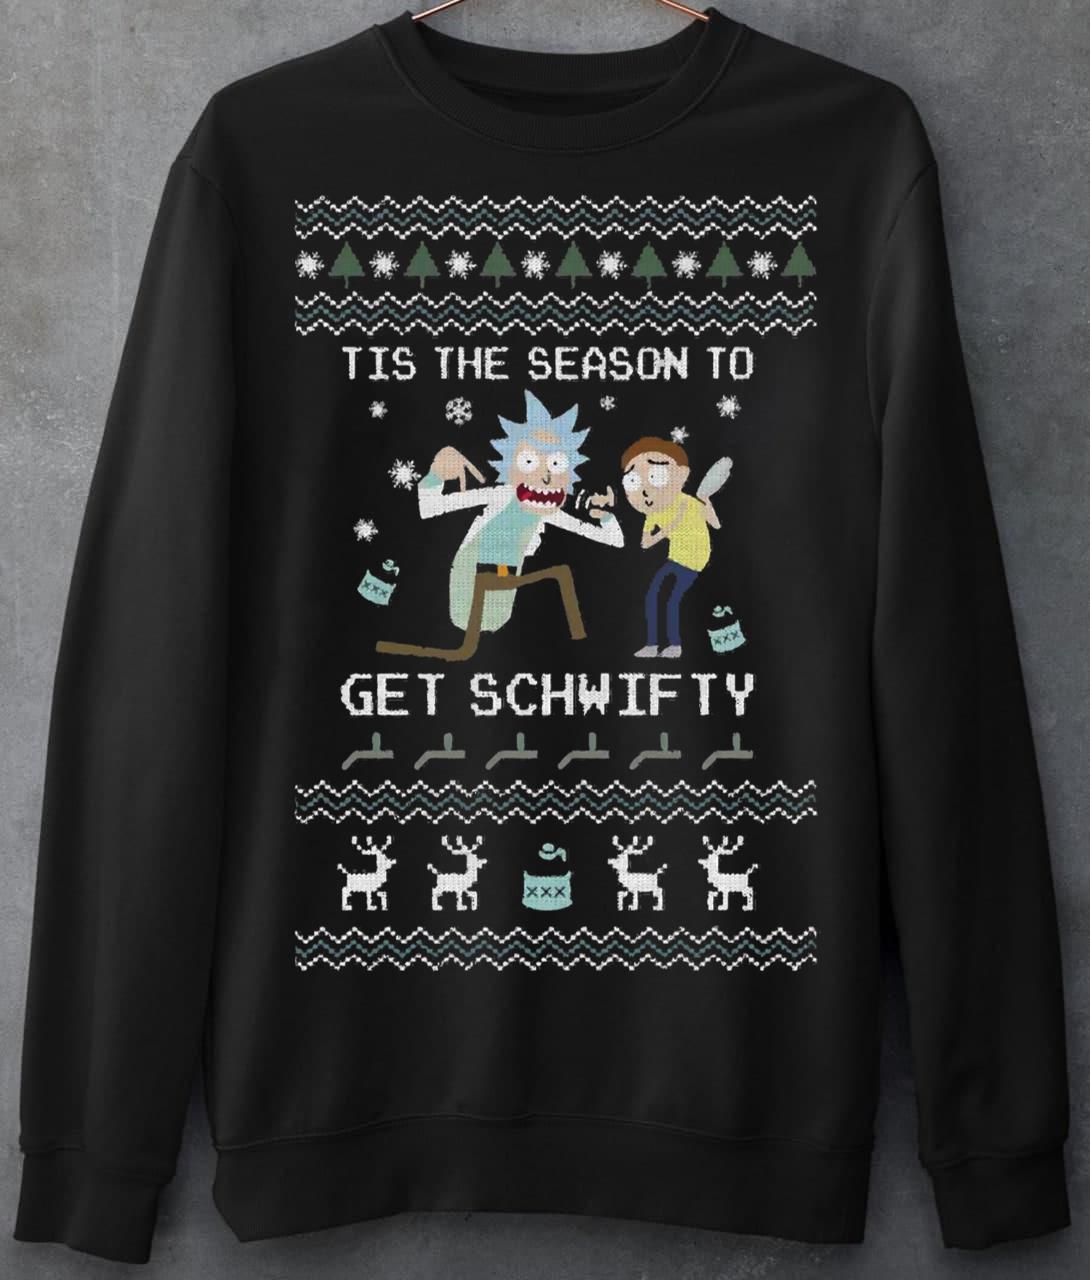 Rick and Morty T-Shirt - Tis The Season To Get Schwifty